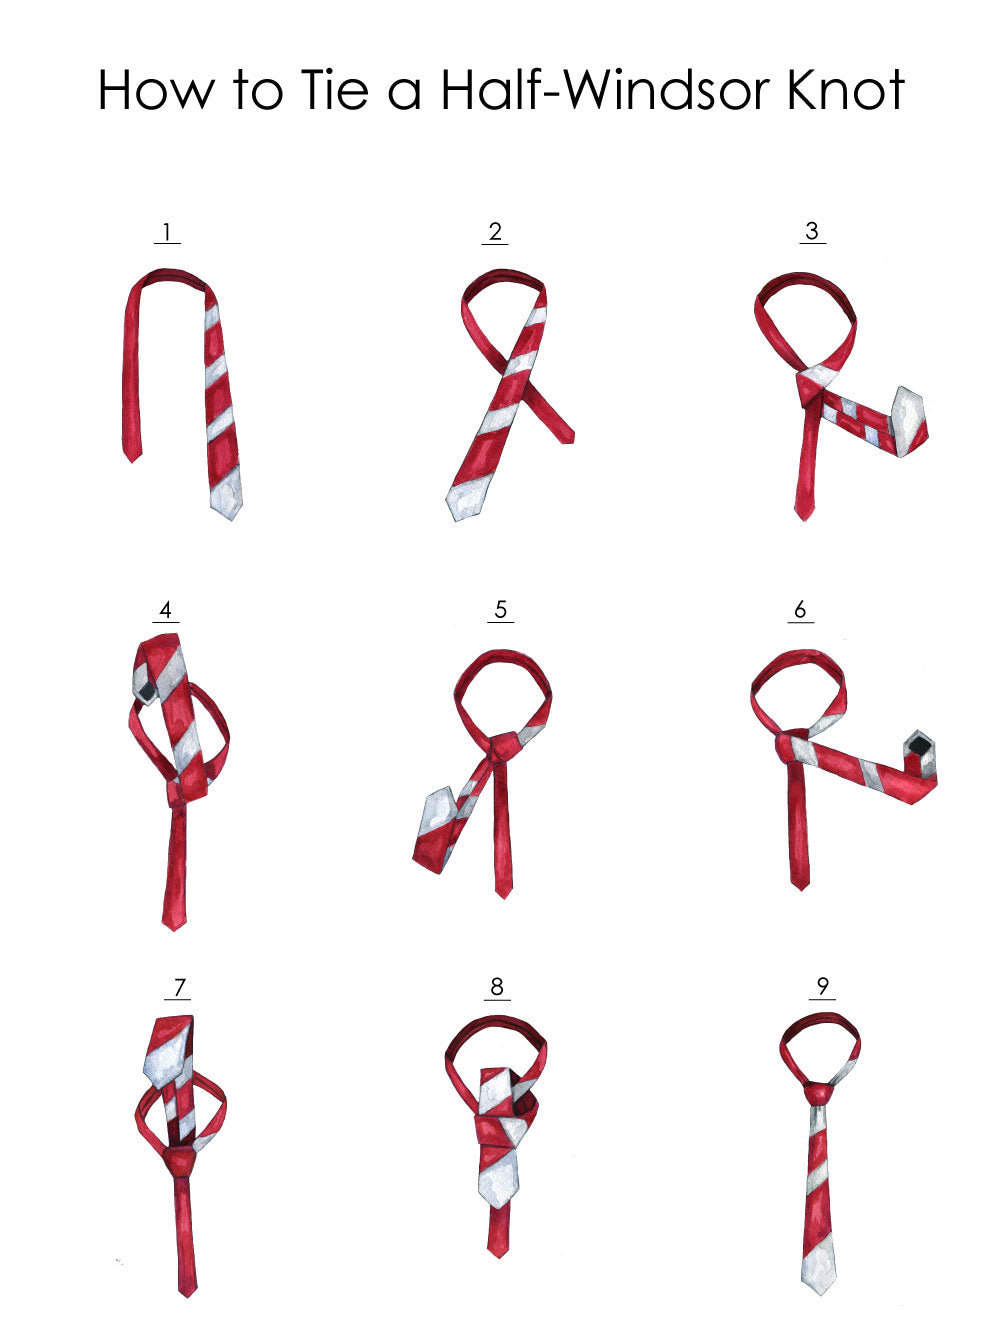 How to Tie a Half-Windsor Knot - LESOVS